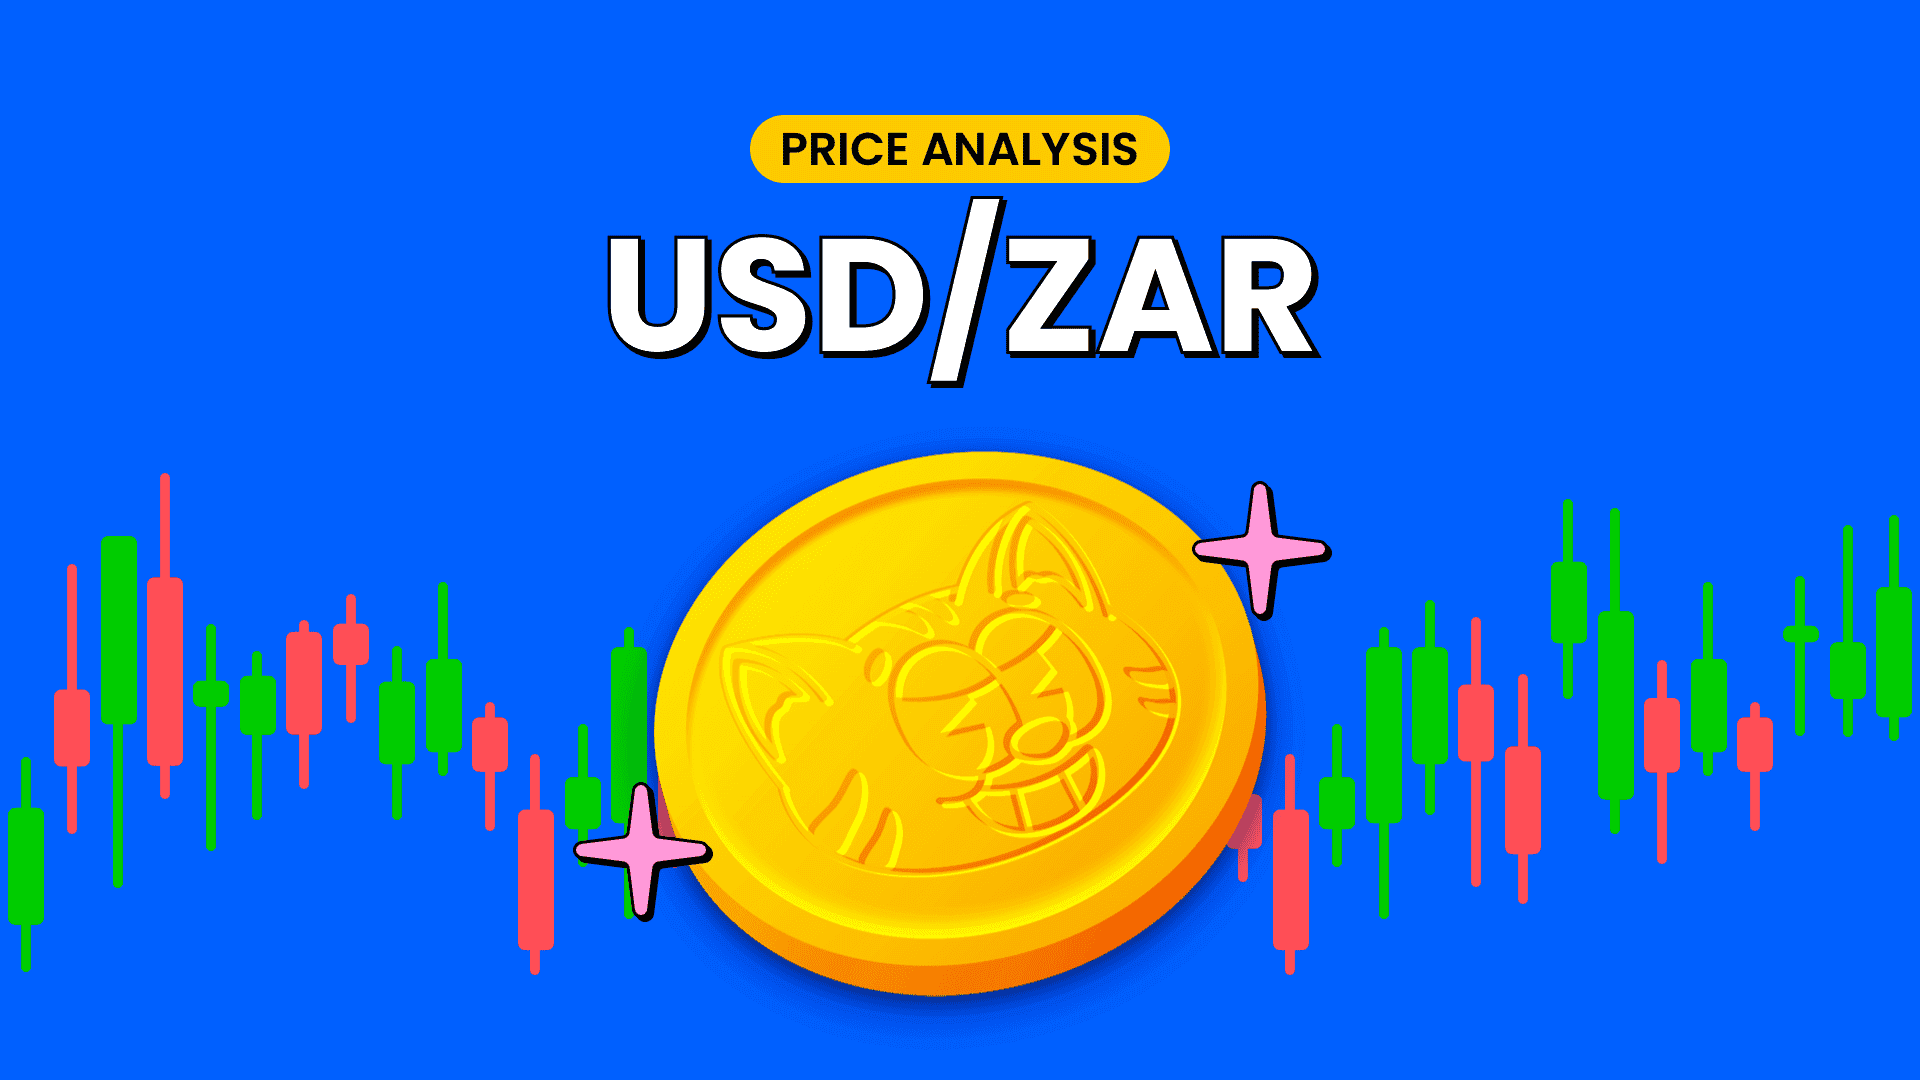 USDZAR-Finds-Support-From-Key-Demand-Zone-Amid-Red-Hot-South-African-Inflation-Feature-Image-49Awq.png